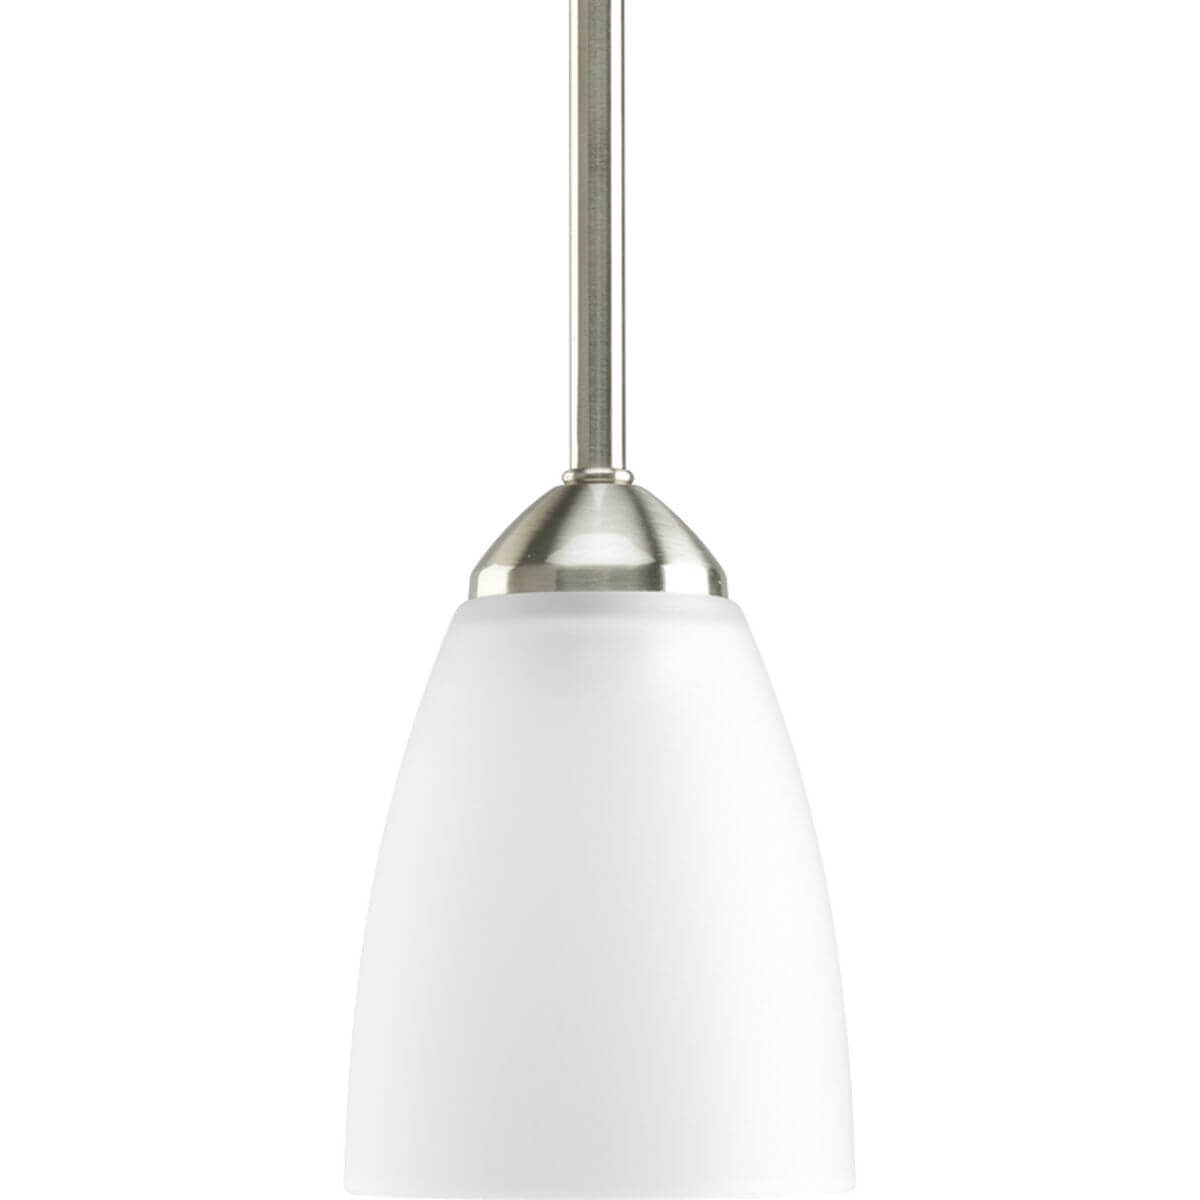 Progress Lighting Gather 1 Light 4 inch Mini Pendant in Brushed Nickel with Etched Glass P5113-09